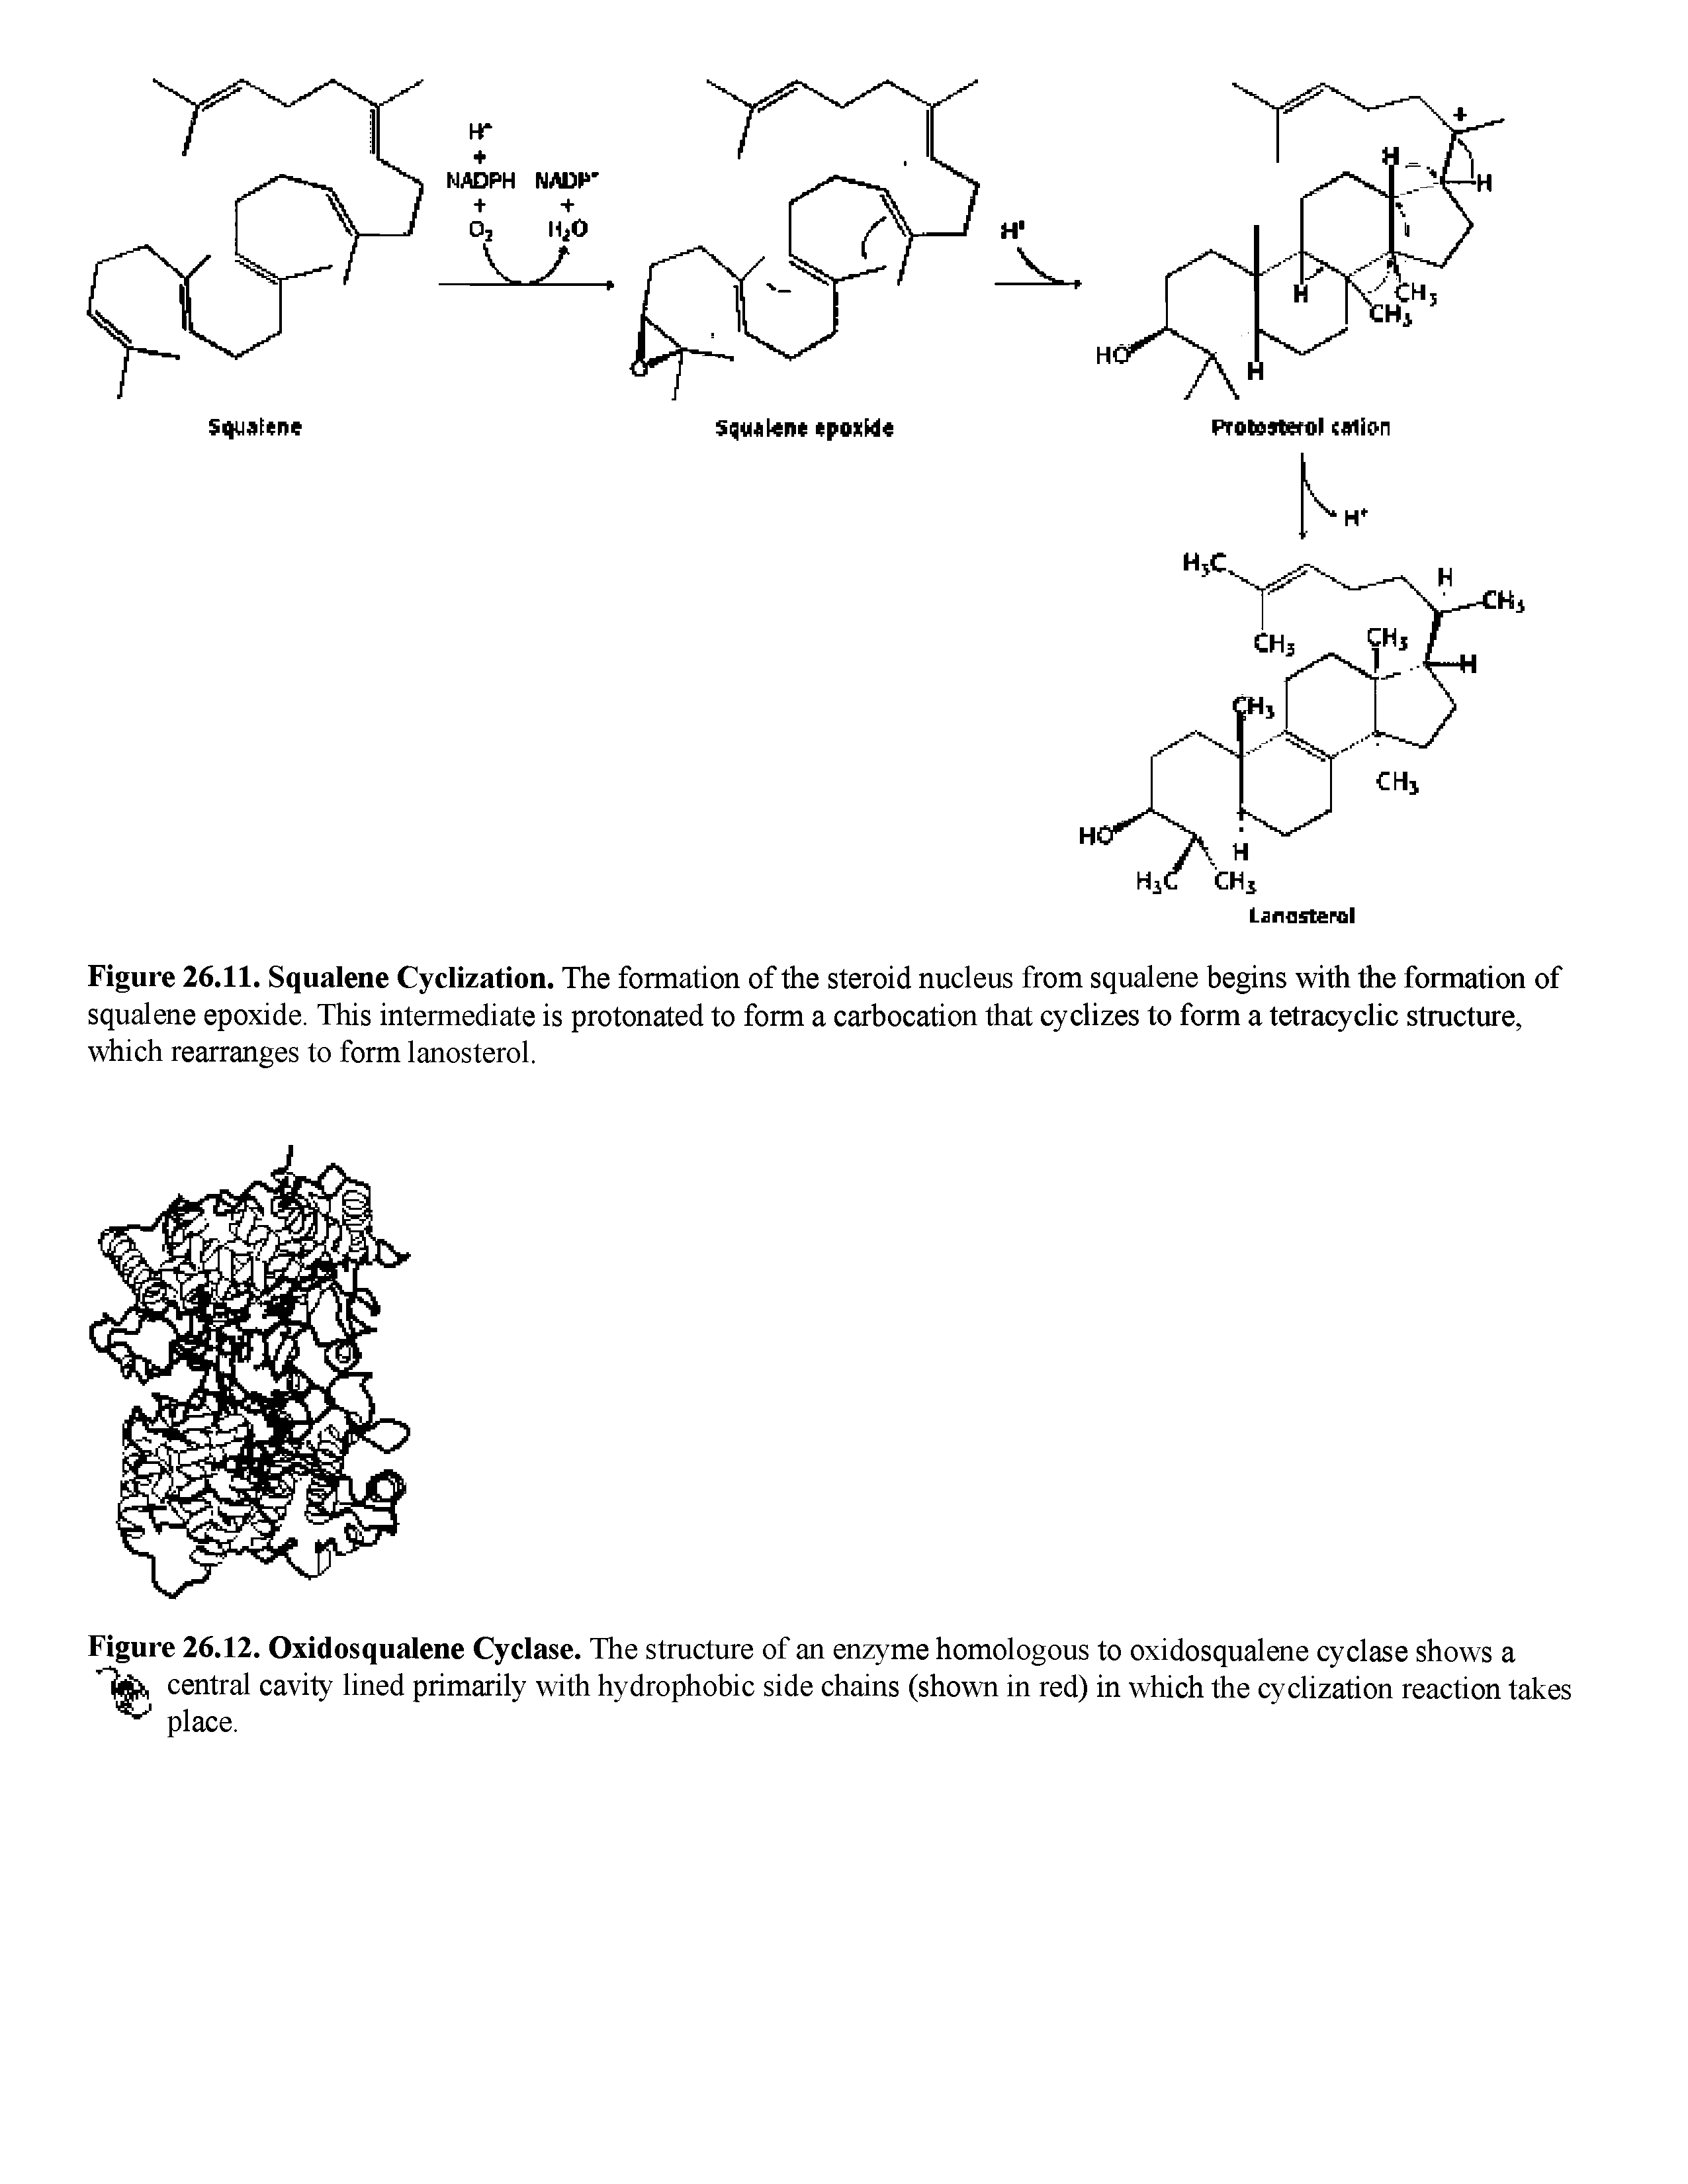 Figure 26.11. Squalene Cyclization. The formation of the steroid nucleus from squalene begins with the formation of squalene epoxide. This intermediate is protonated to form a carbocation that cyclizes to form a tetracyclic structure, which rearranges to form lanosterol.